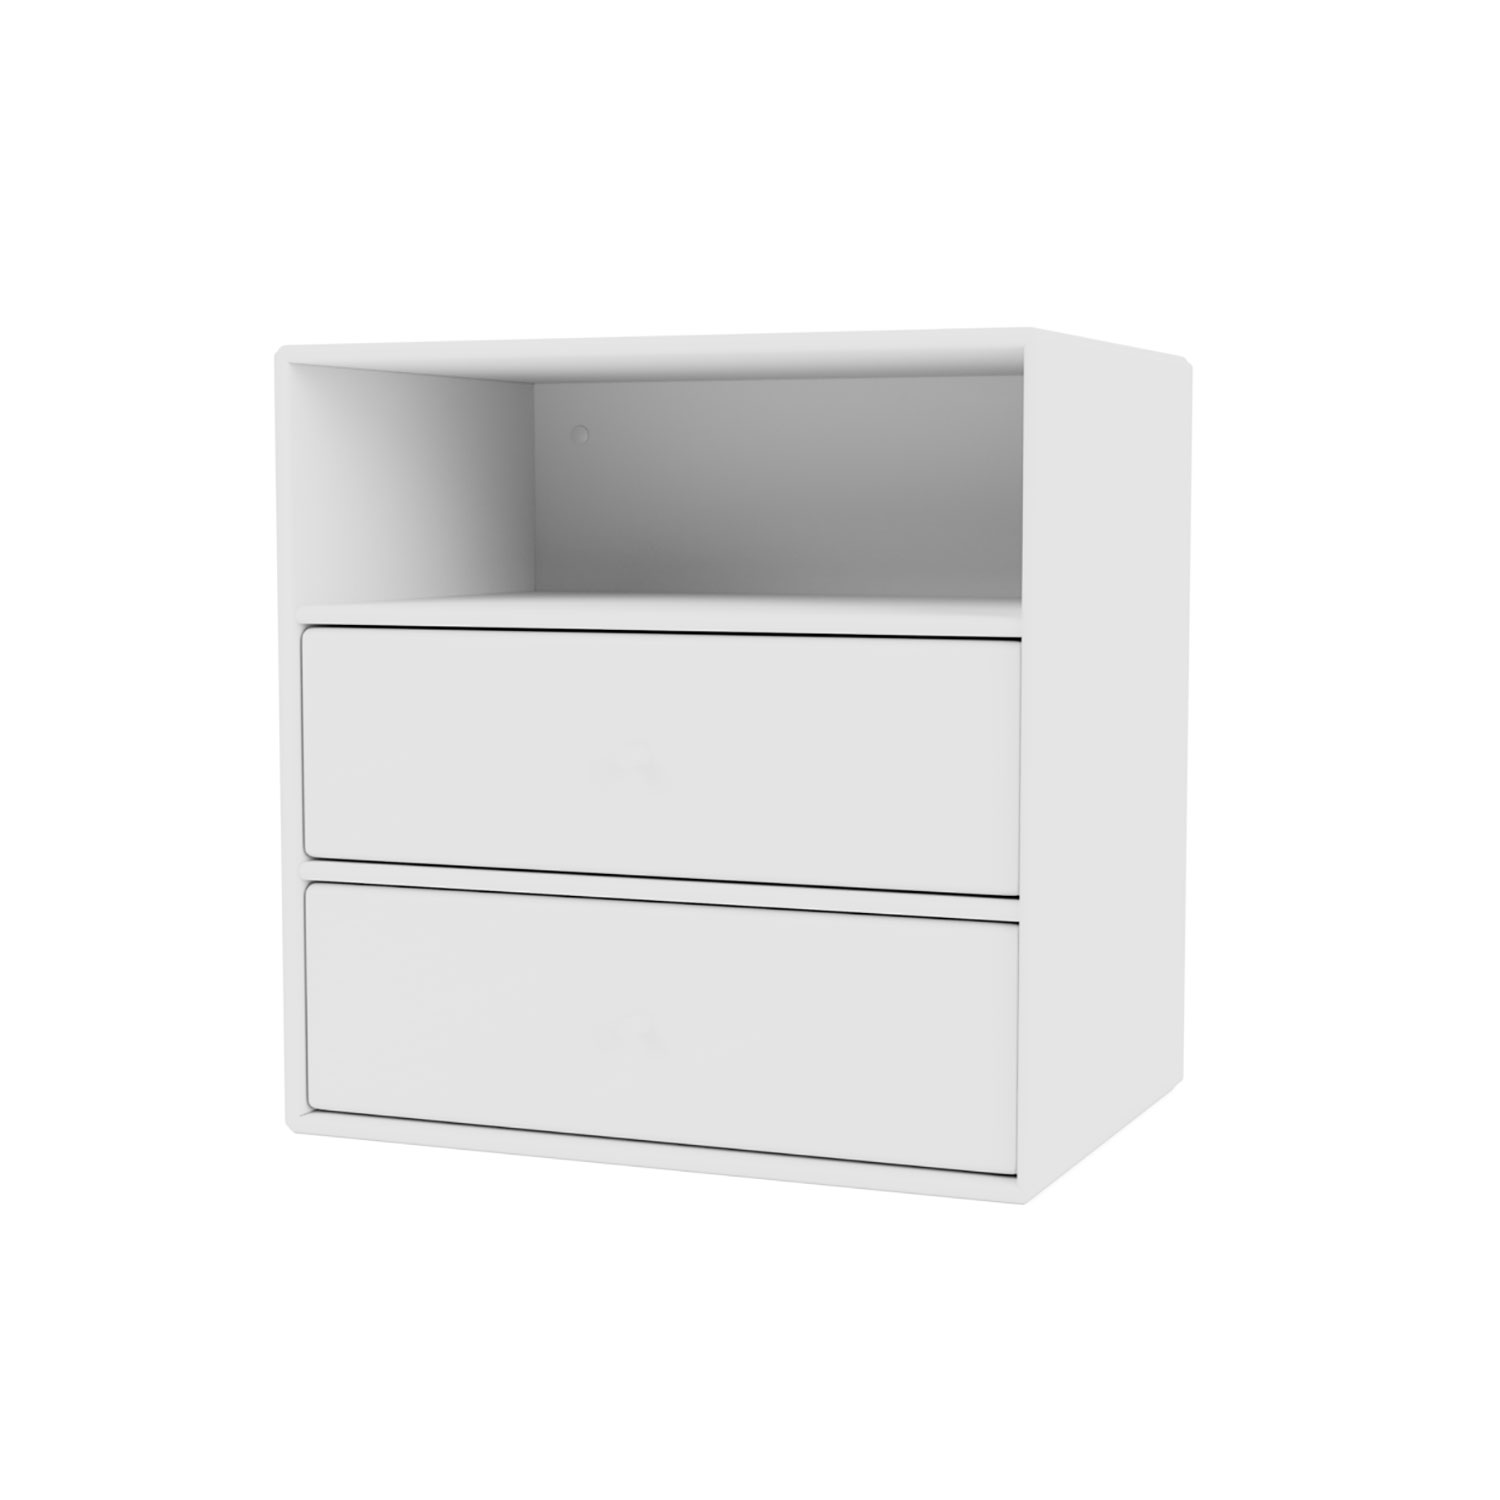 Mini 1006 with two drawers, New white